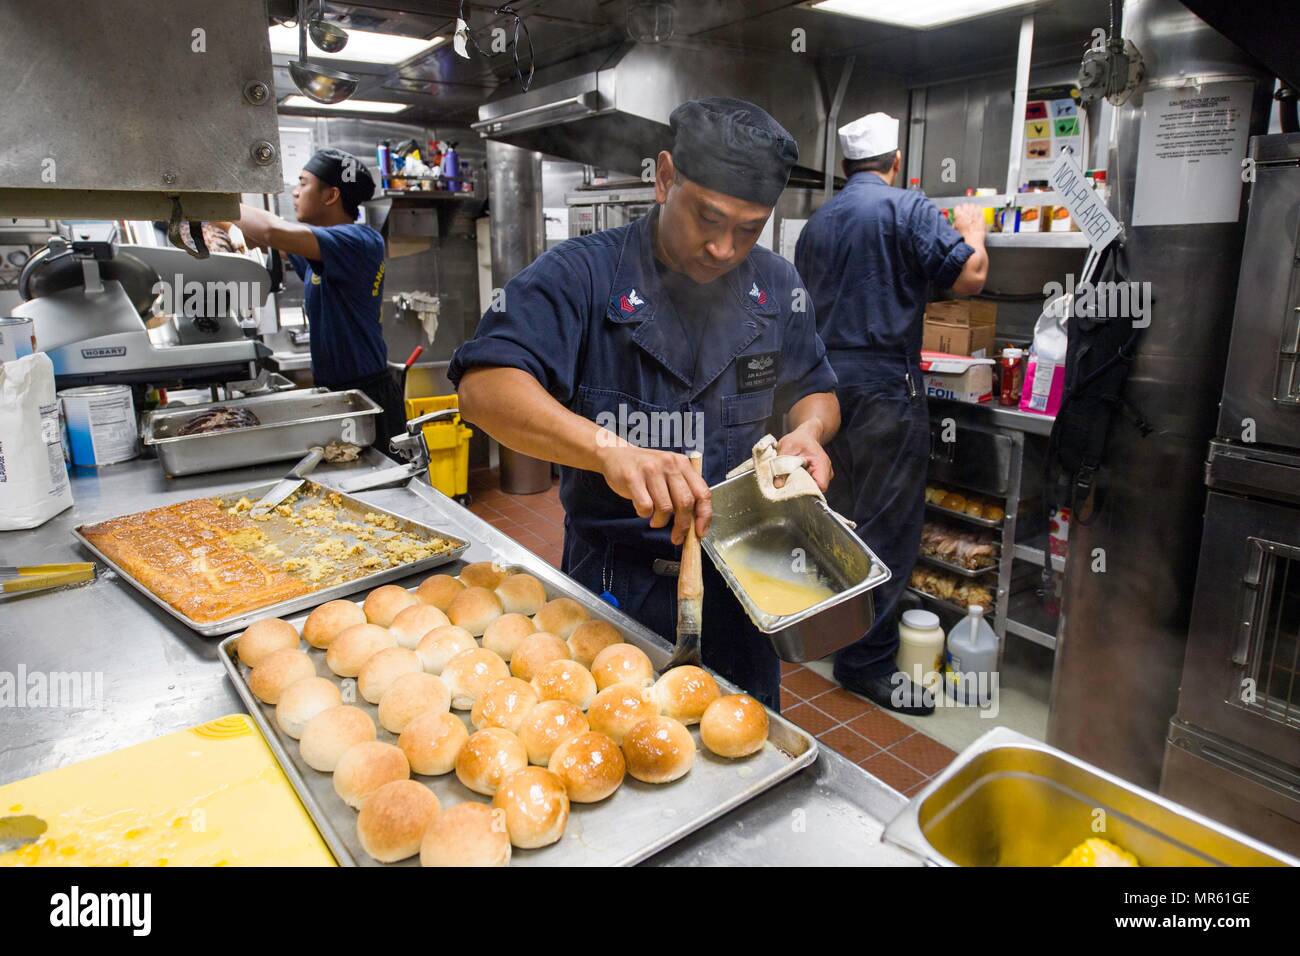 170514-N-BV658-129     SOUTH CHINA SEA(May 14, 2017)   Jun Alejandrino, a native of the Philippines, prepares dinner rolls in the galley aboard the Arleigh Burke-class guided-missile destroyer USS Dewey (DDG 105).  Dewey is part of the Sterett-Dewey Surface Action Group and is the third deploying group operating under the command and control construct called 3rd Fleet Forward.  The U.S. 3rd Fleet operating forward offers additional options to the Pacific Fleet commander by leveraging the capabilities of 3rd and 7th Fleets. (U.S. Navy Photo By Mass Communication Specialist 3rd Class Kryzentia W Stock Photo